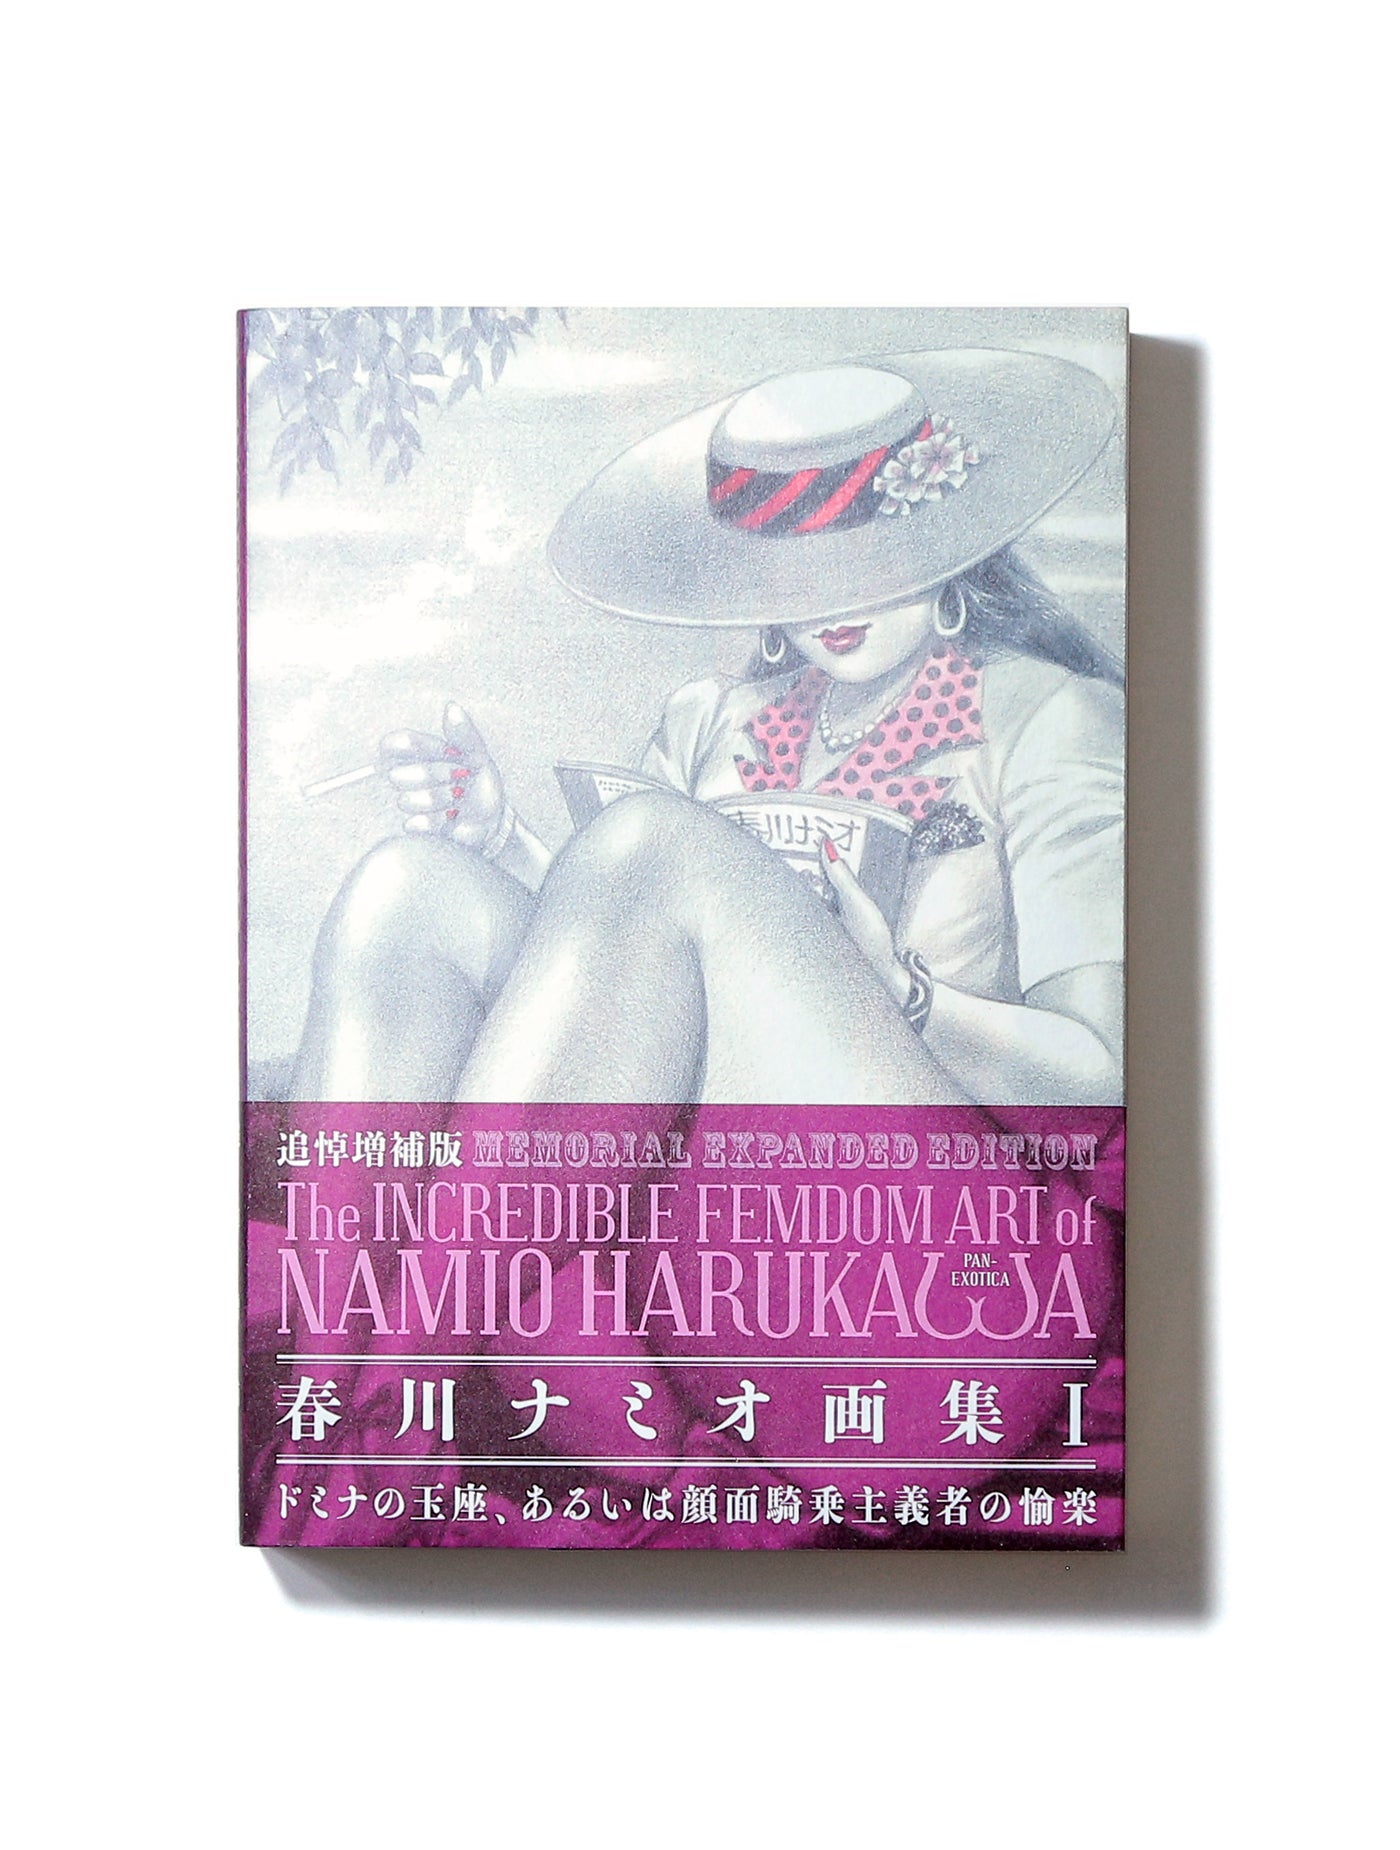 The Incredible Femdom Art of Namio Harukawa (Memorial Expanded Edition) book cover